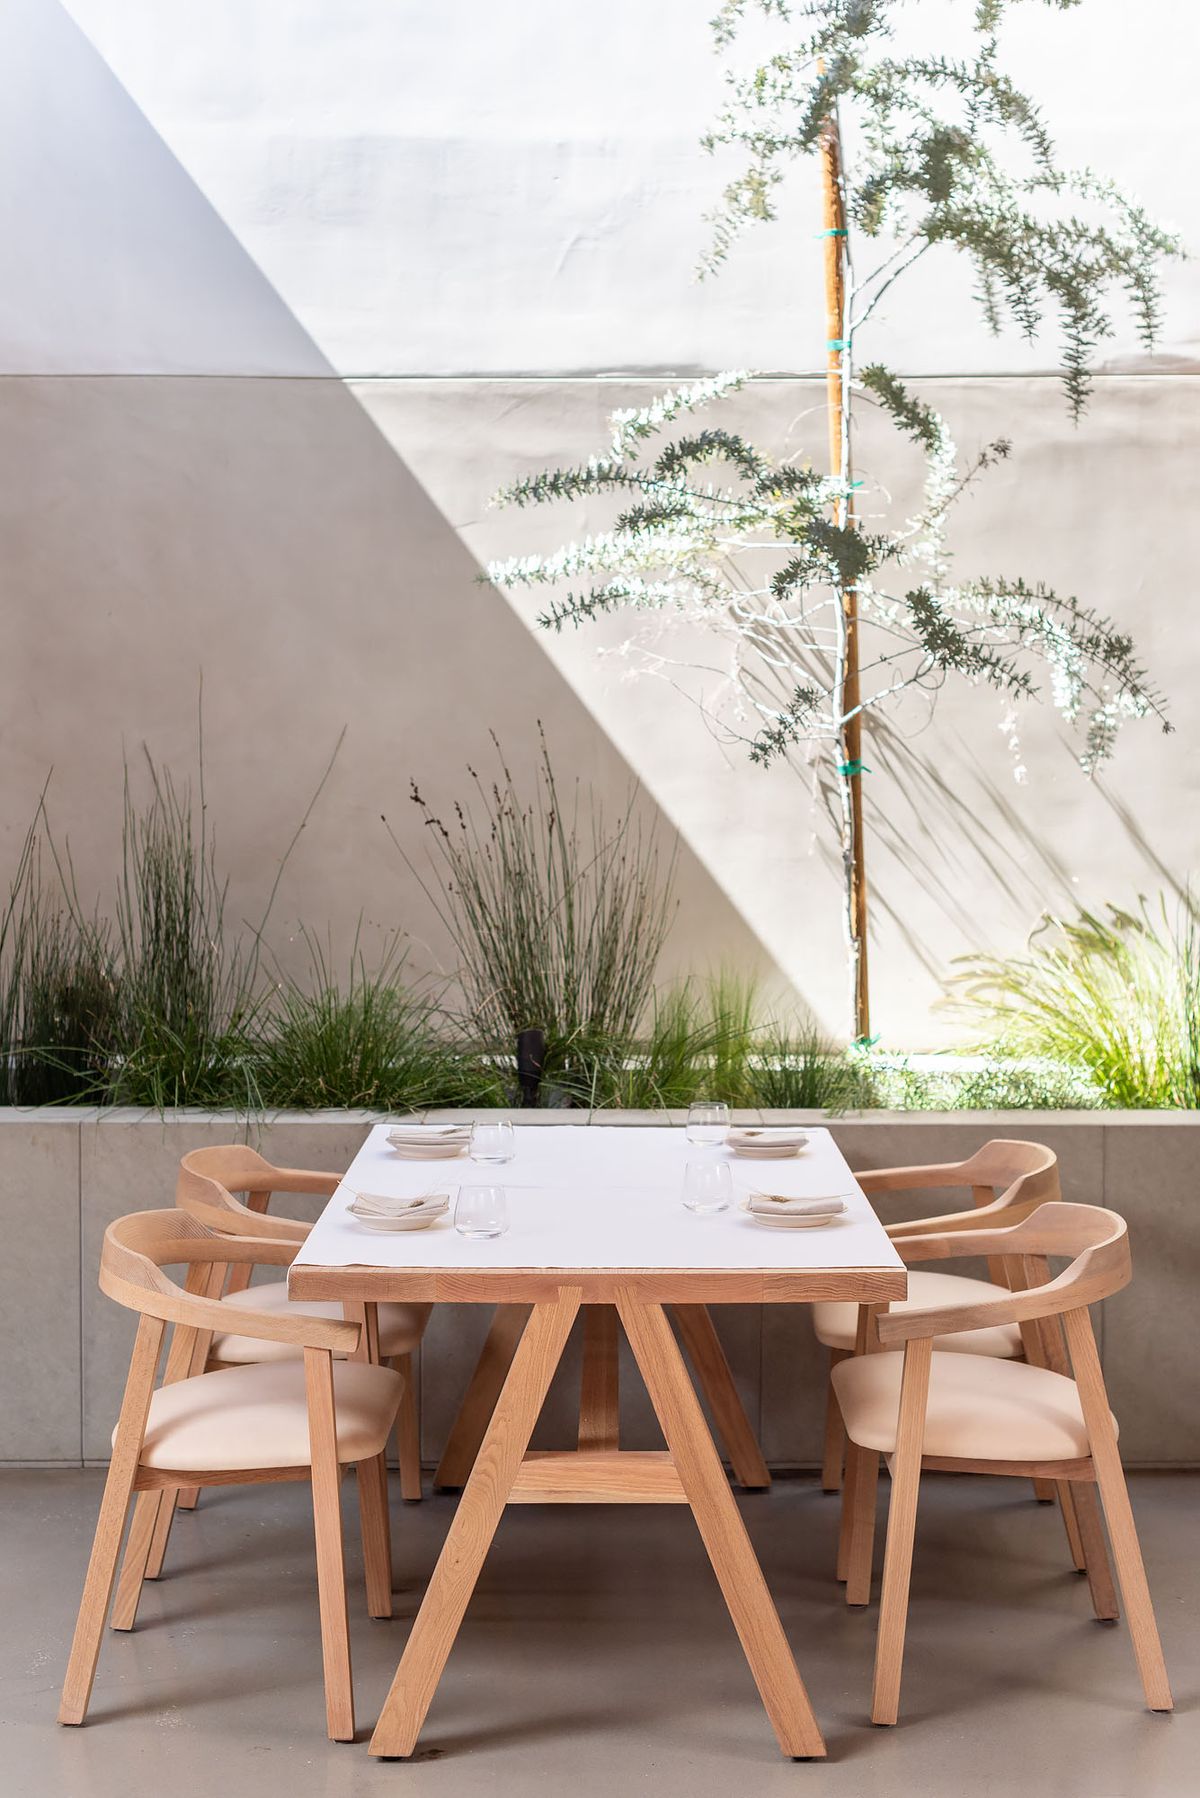 A table set for service in a modern, pared-down wood-lined dining restaurant.